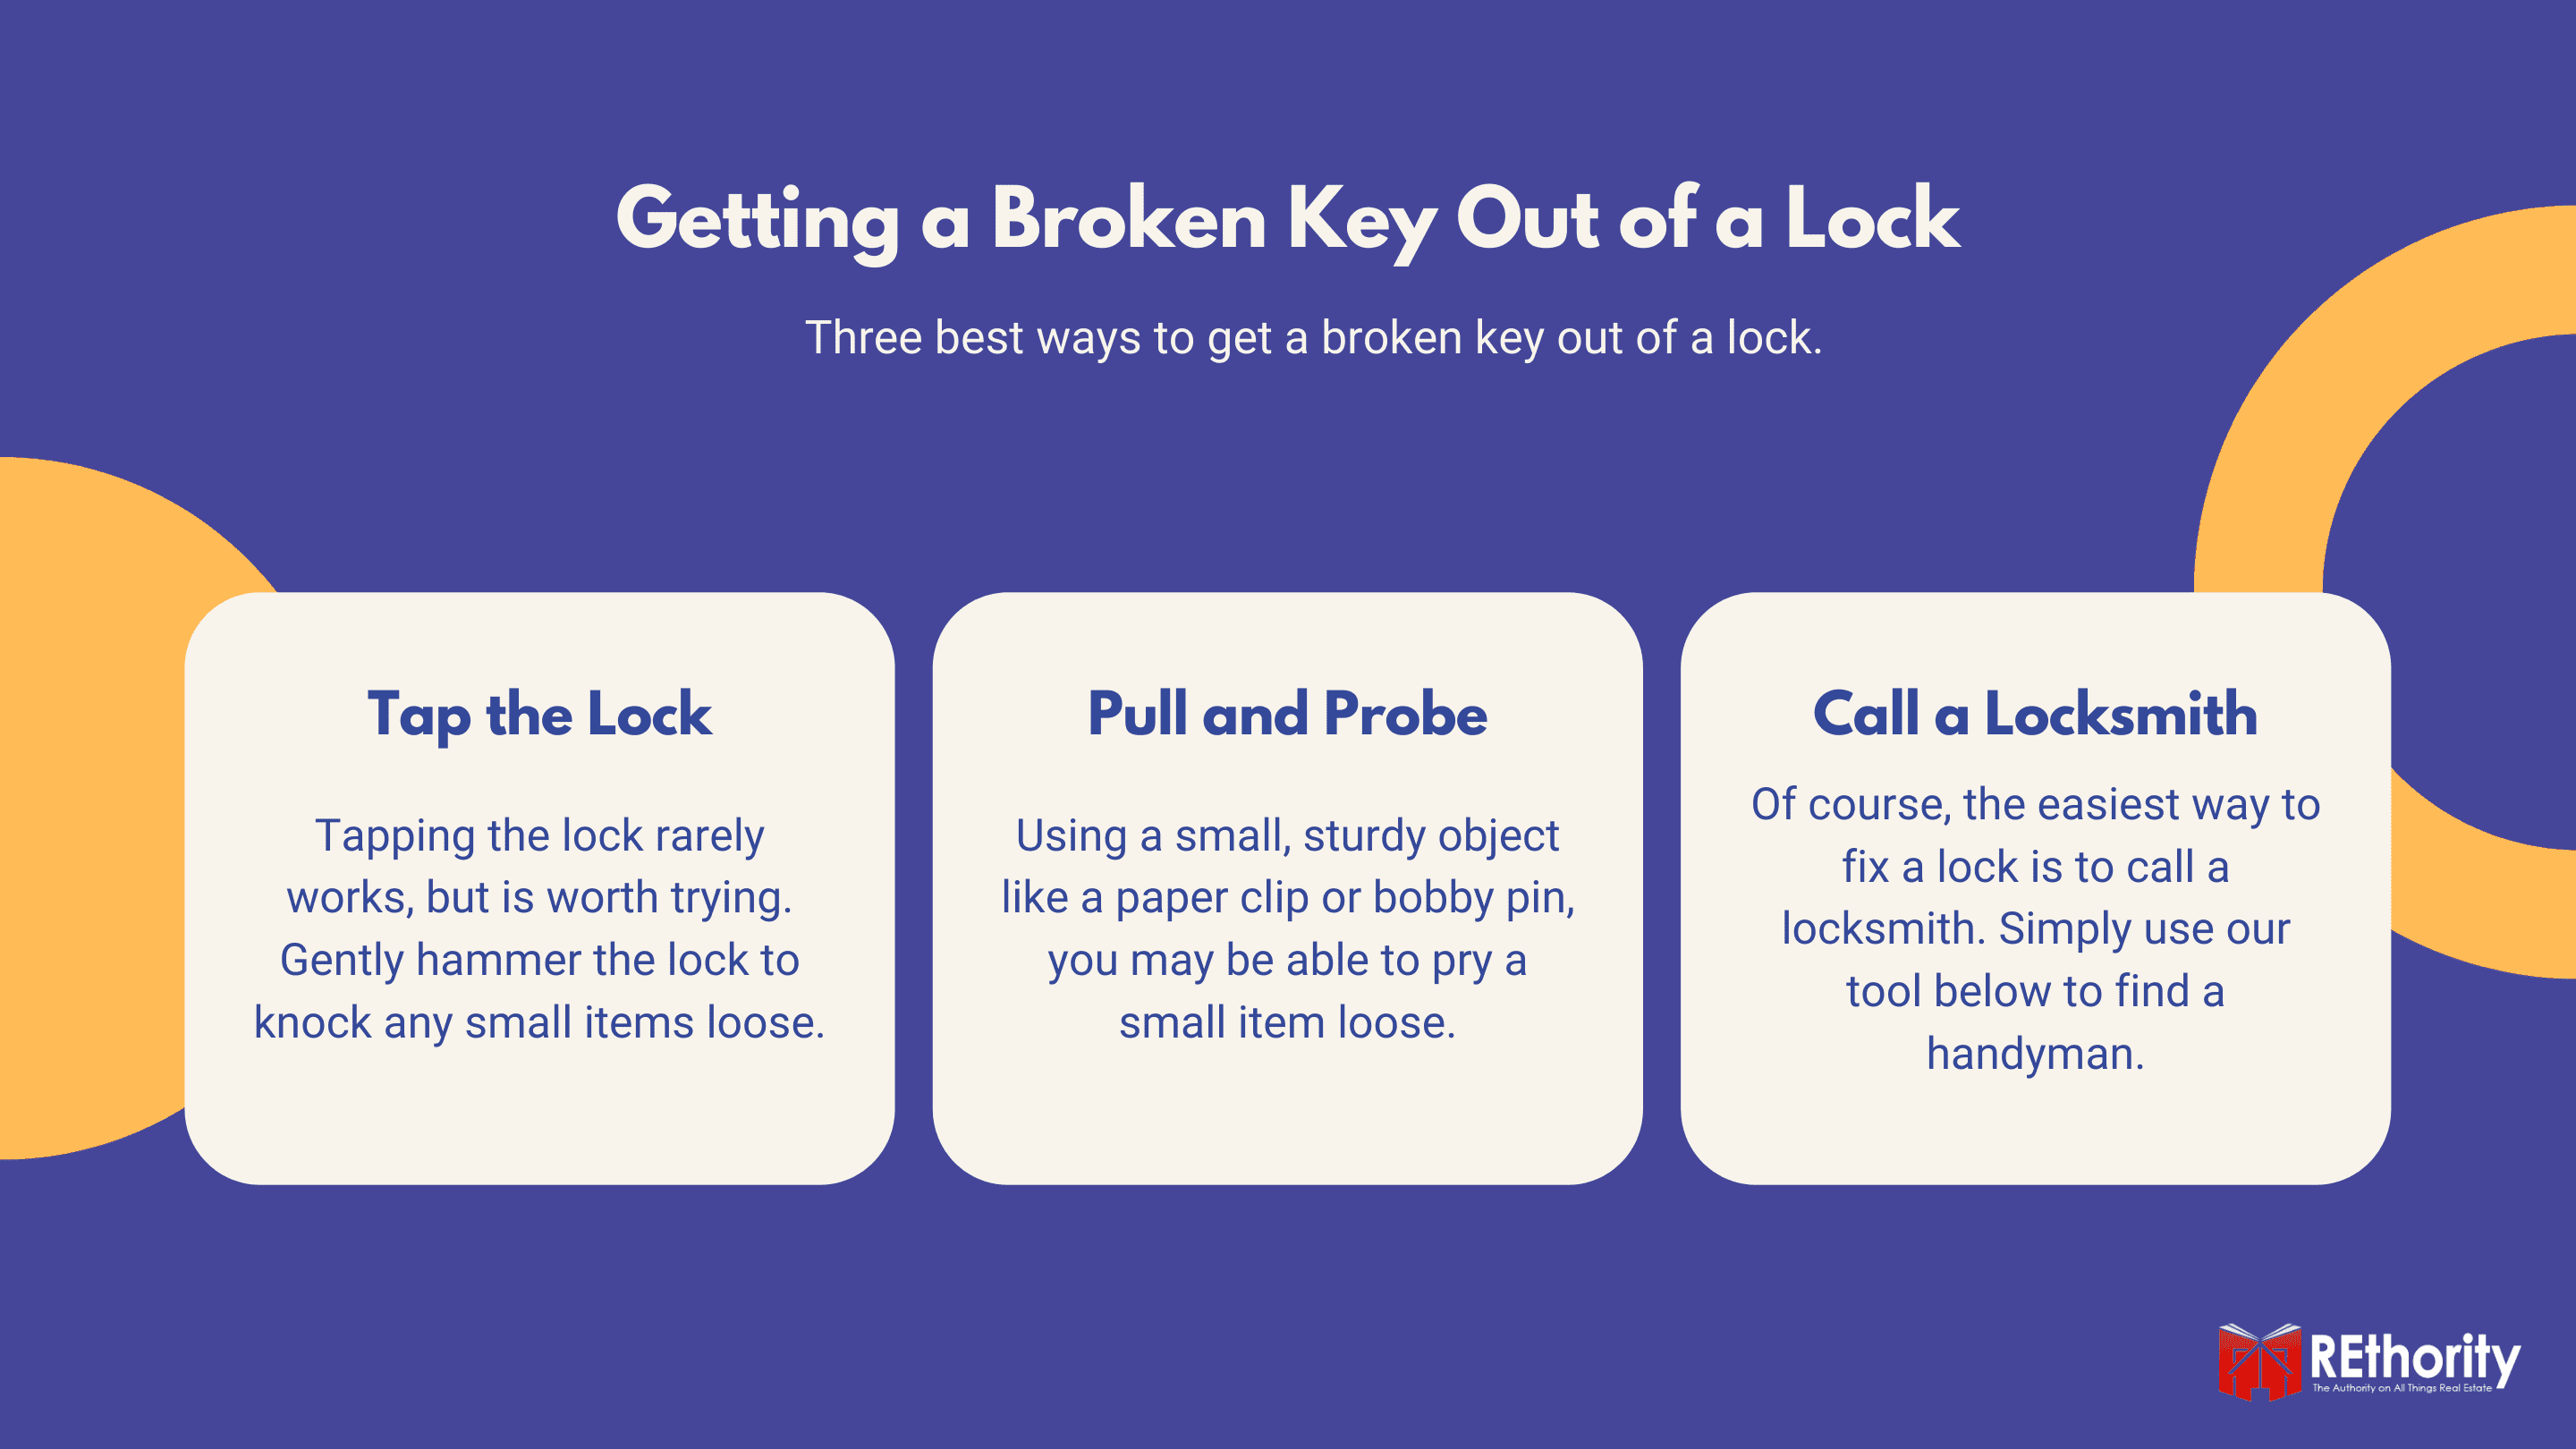 Three methods to use to get a broken key out of a lock